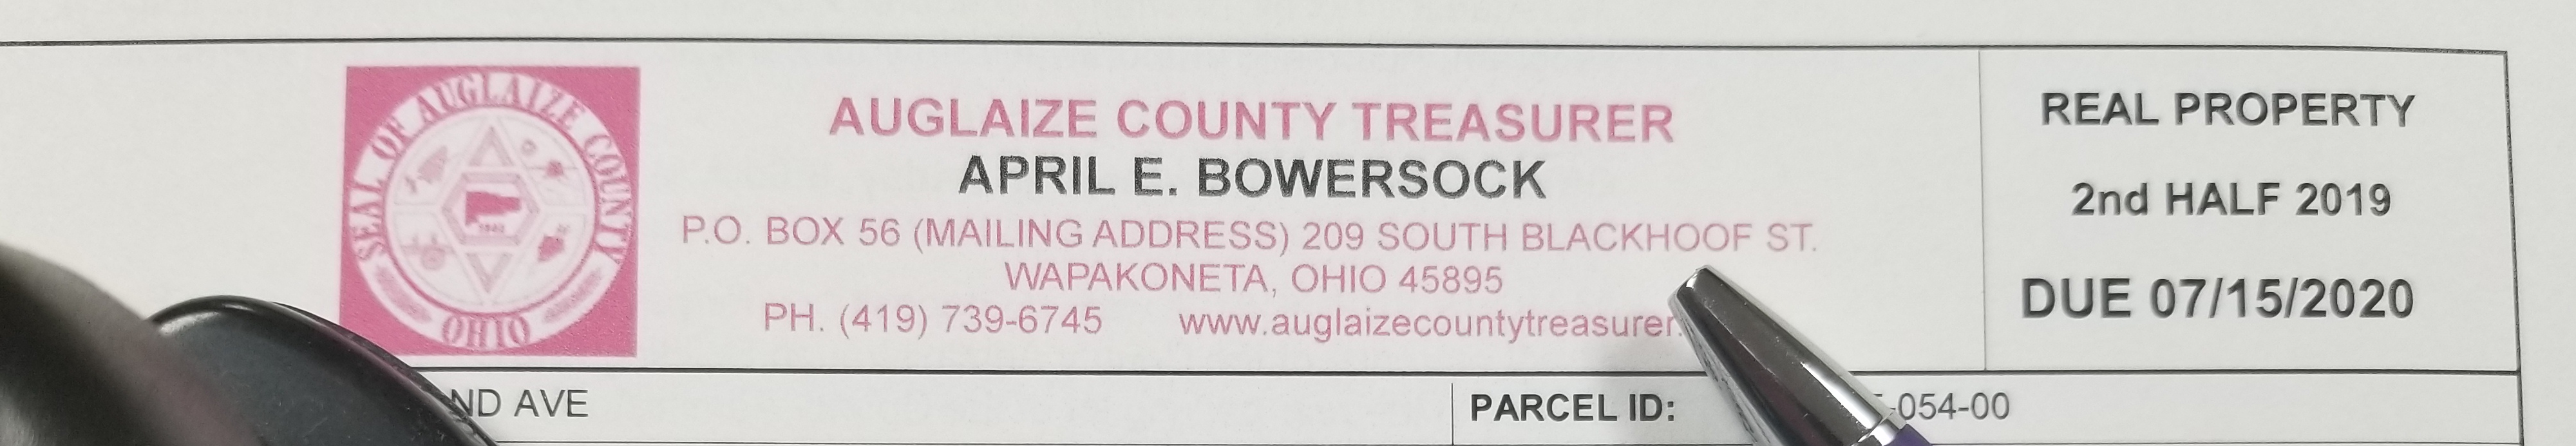 Auglaize County Treasurer